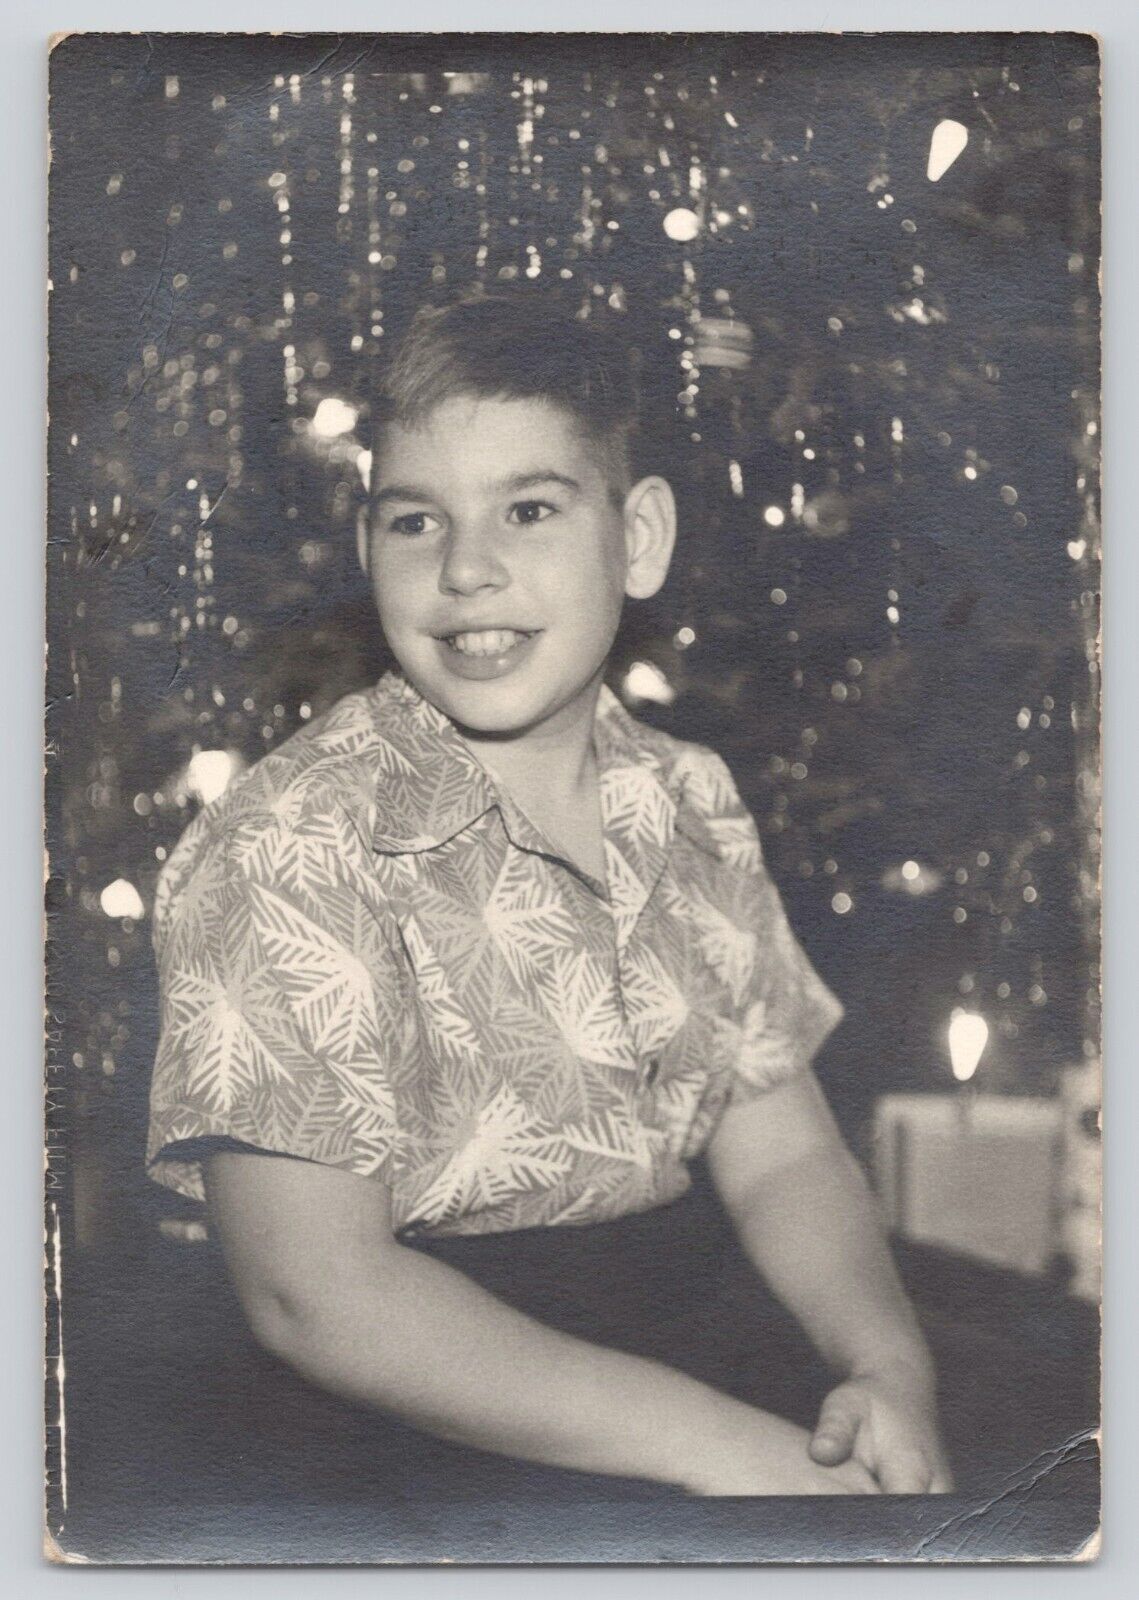 Vintage Photo 1950s Smiling Boy On Christmas Morning Under Tree Presents Gifts